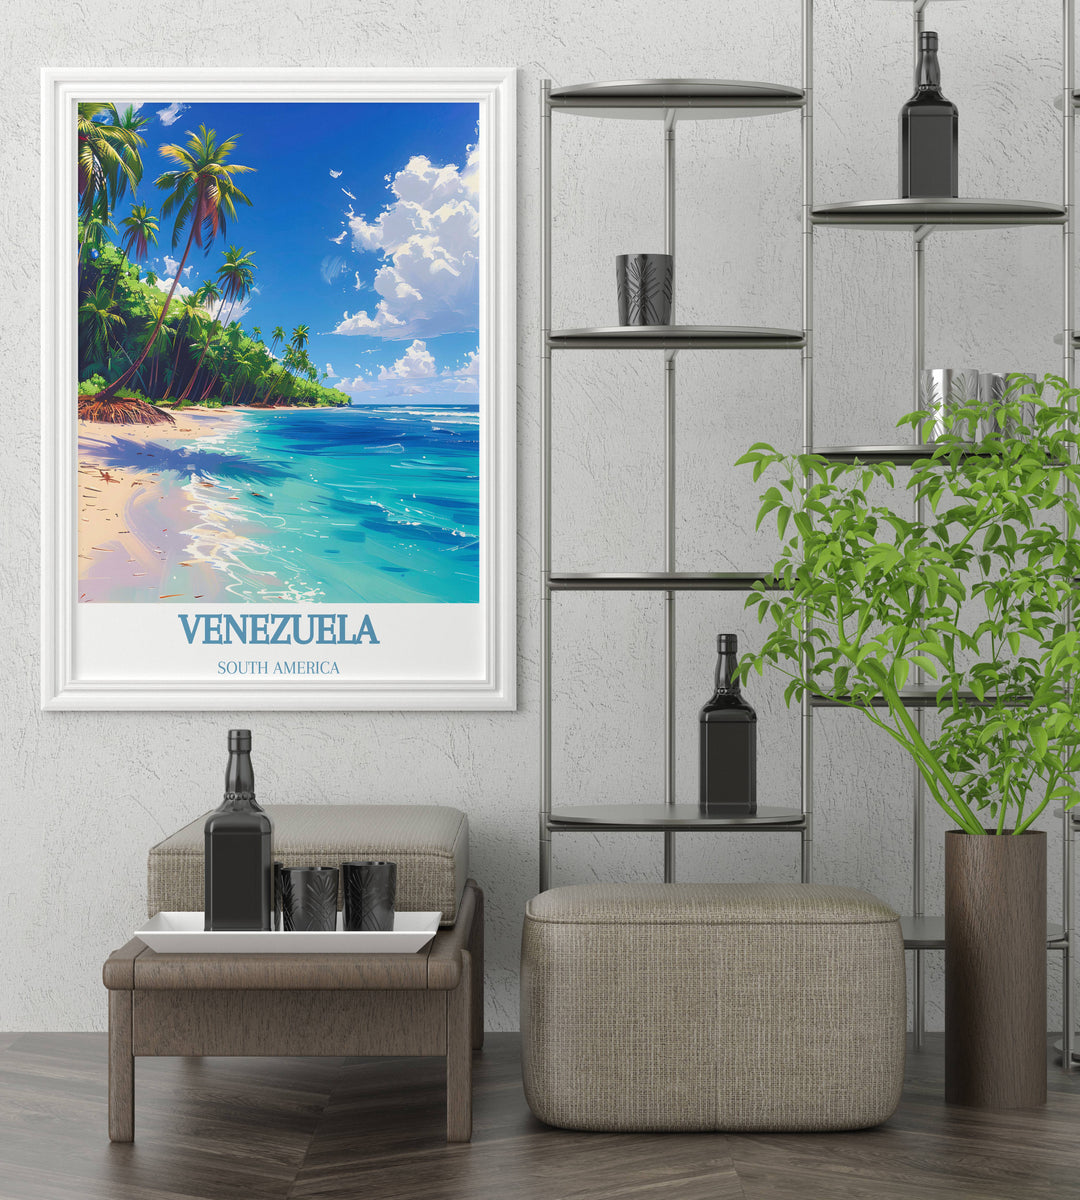 Stunning wall art of Morrocoy National Park, highlighting the diverse ecosystems and natural beauty of Venezuela.